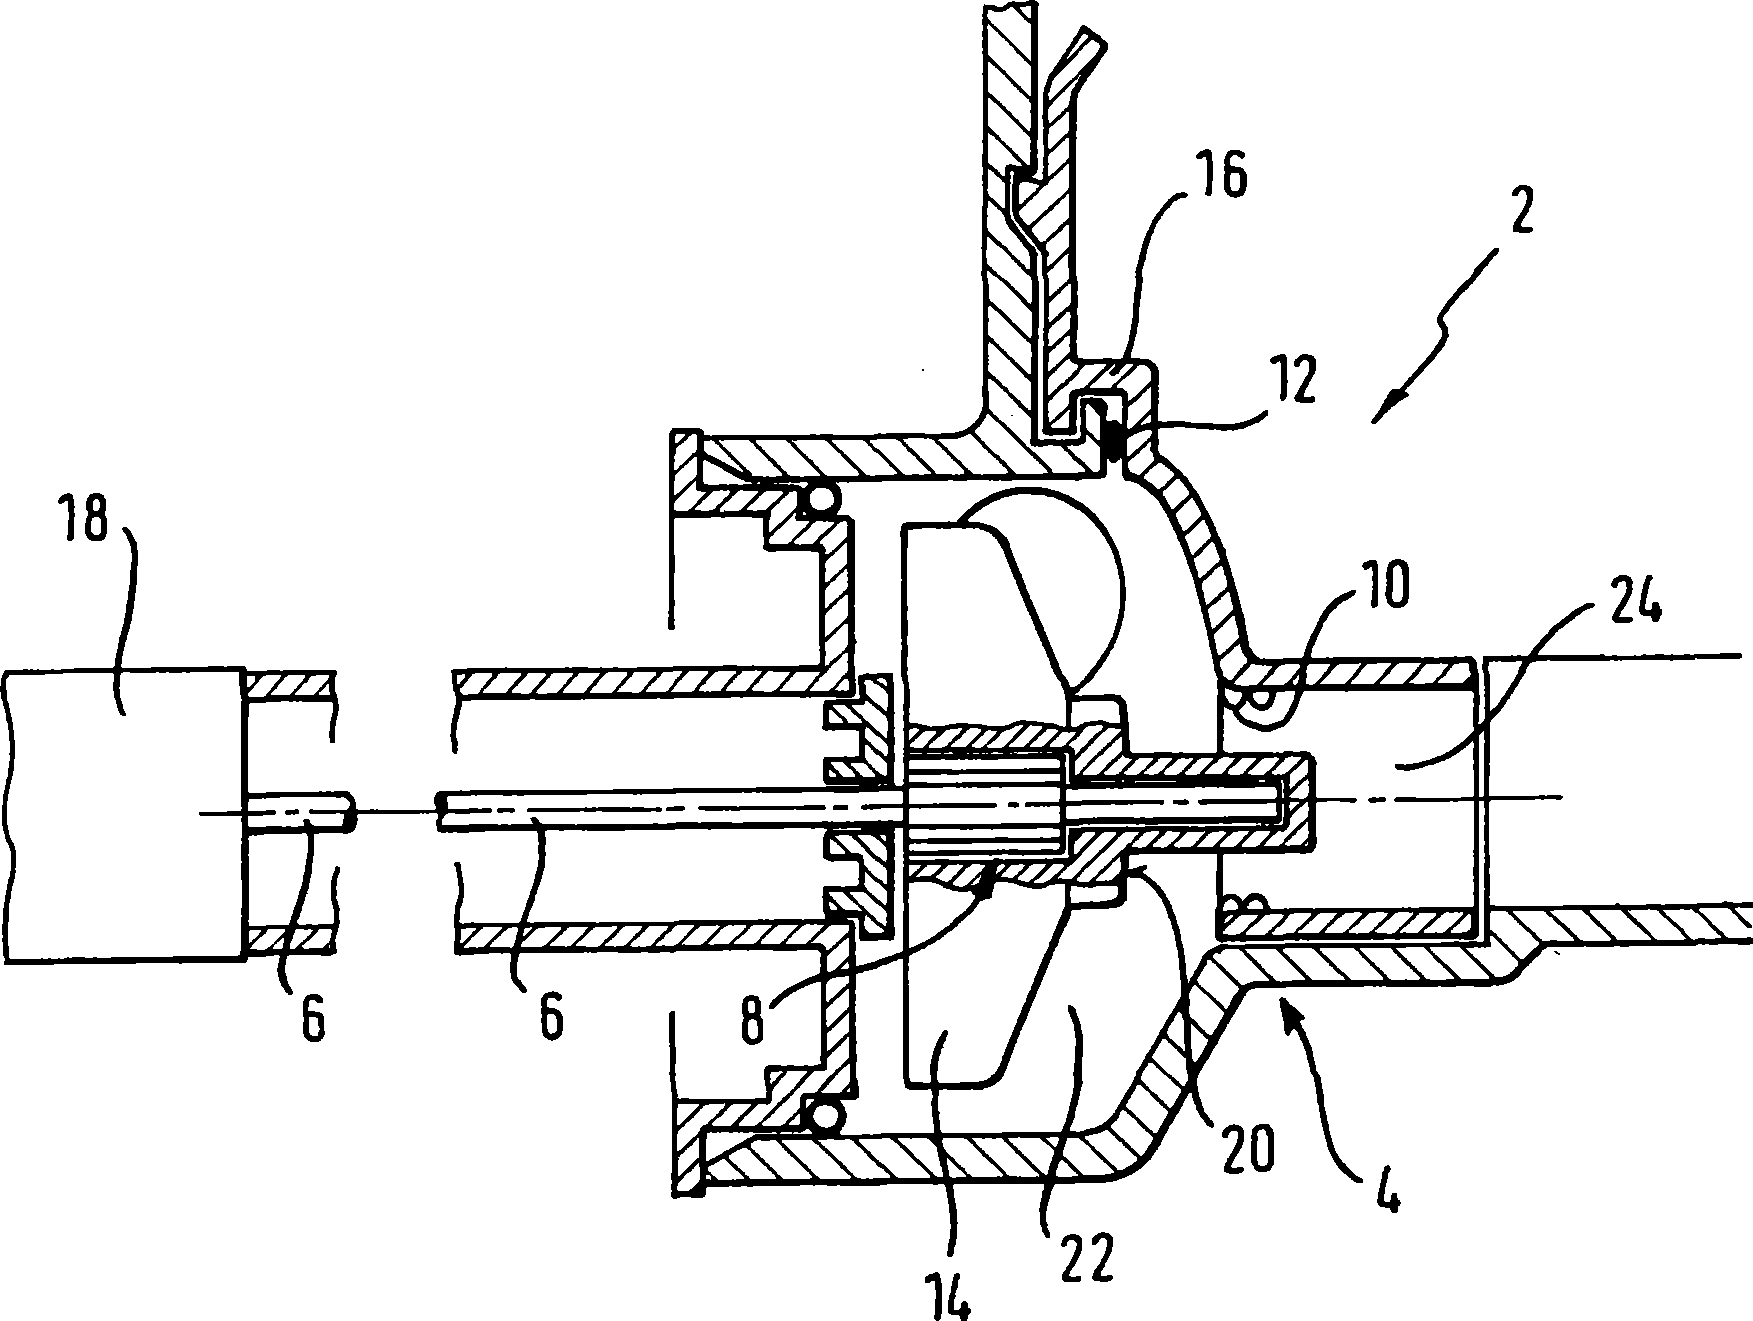 Water-guiding household device with a pump with a valve function